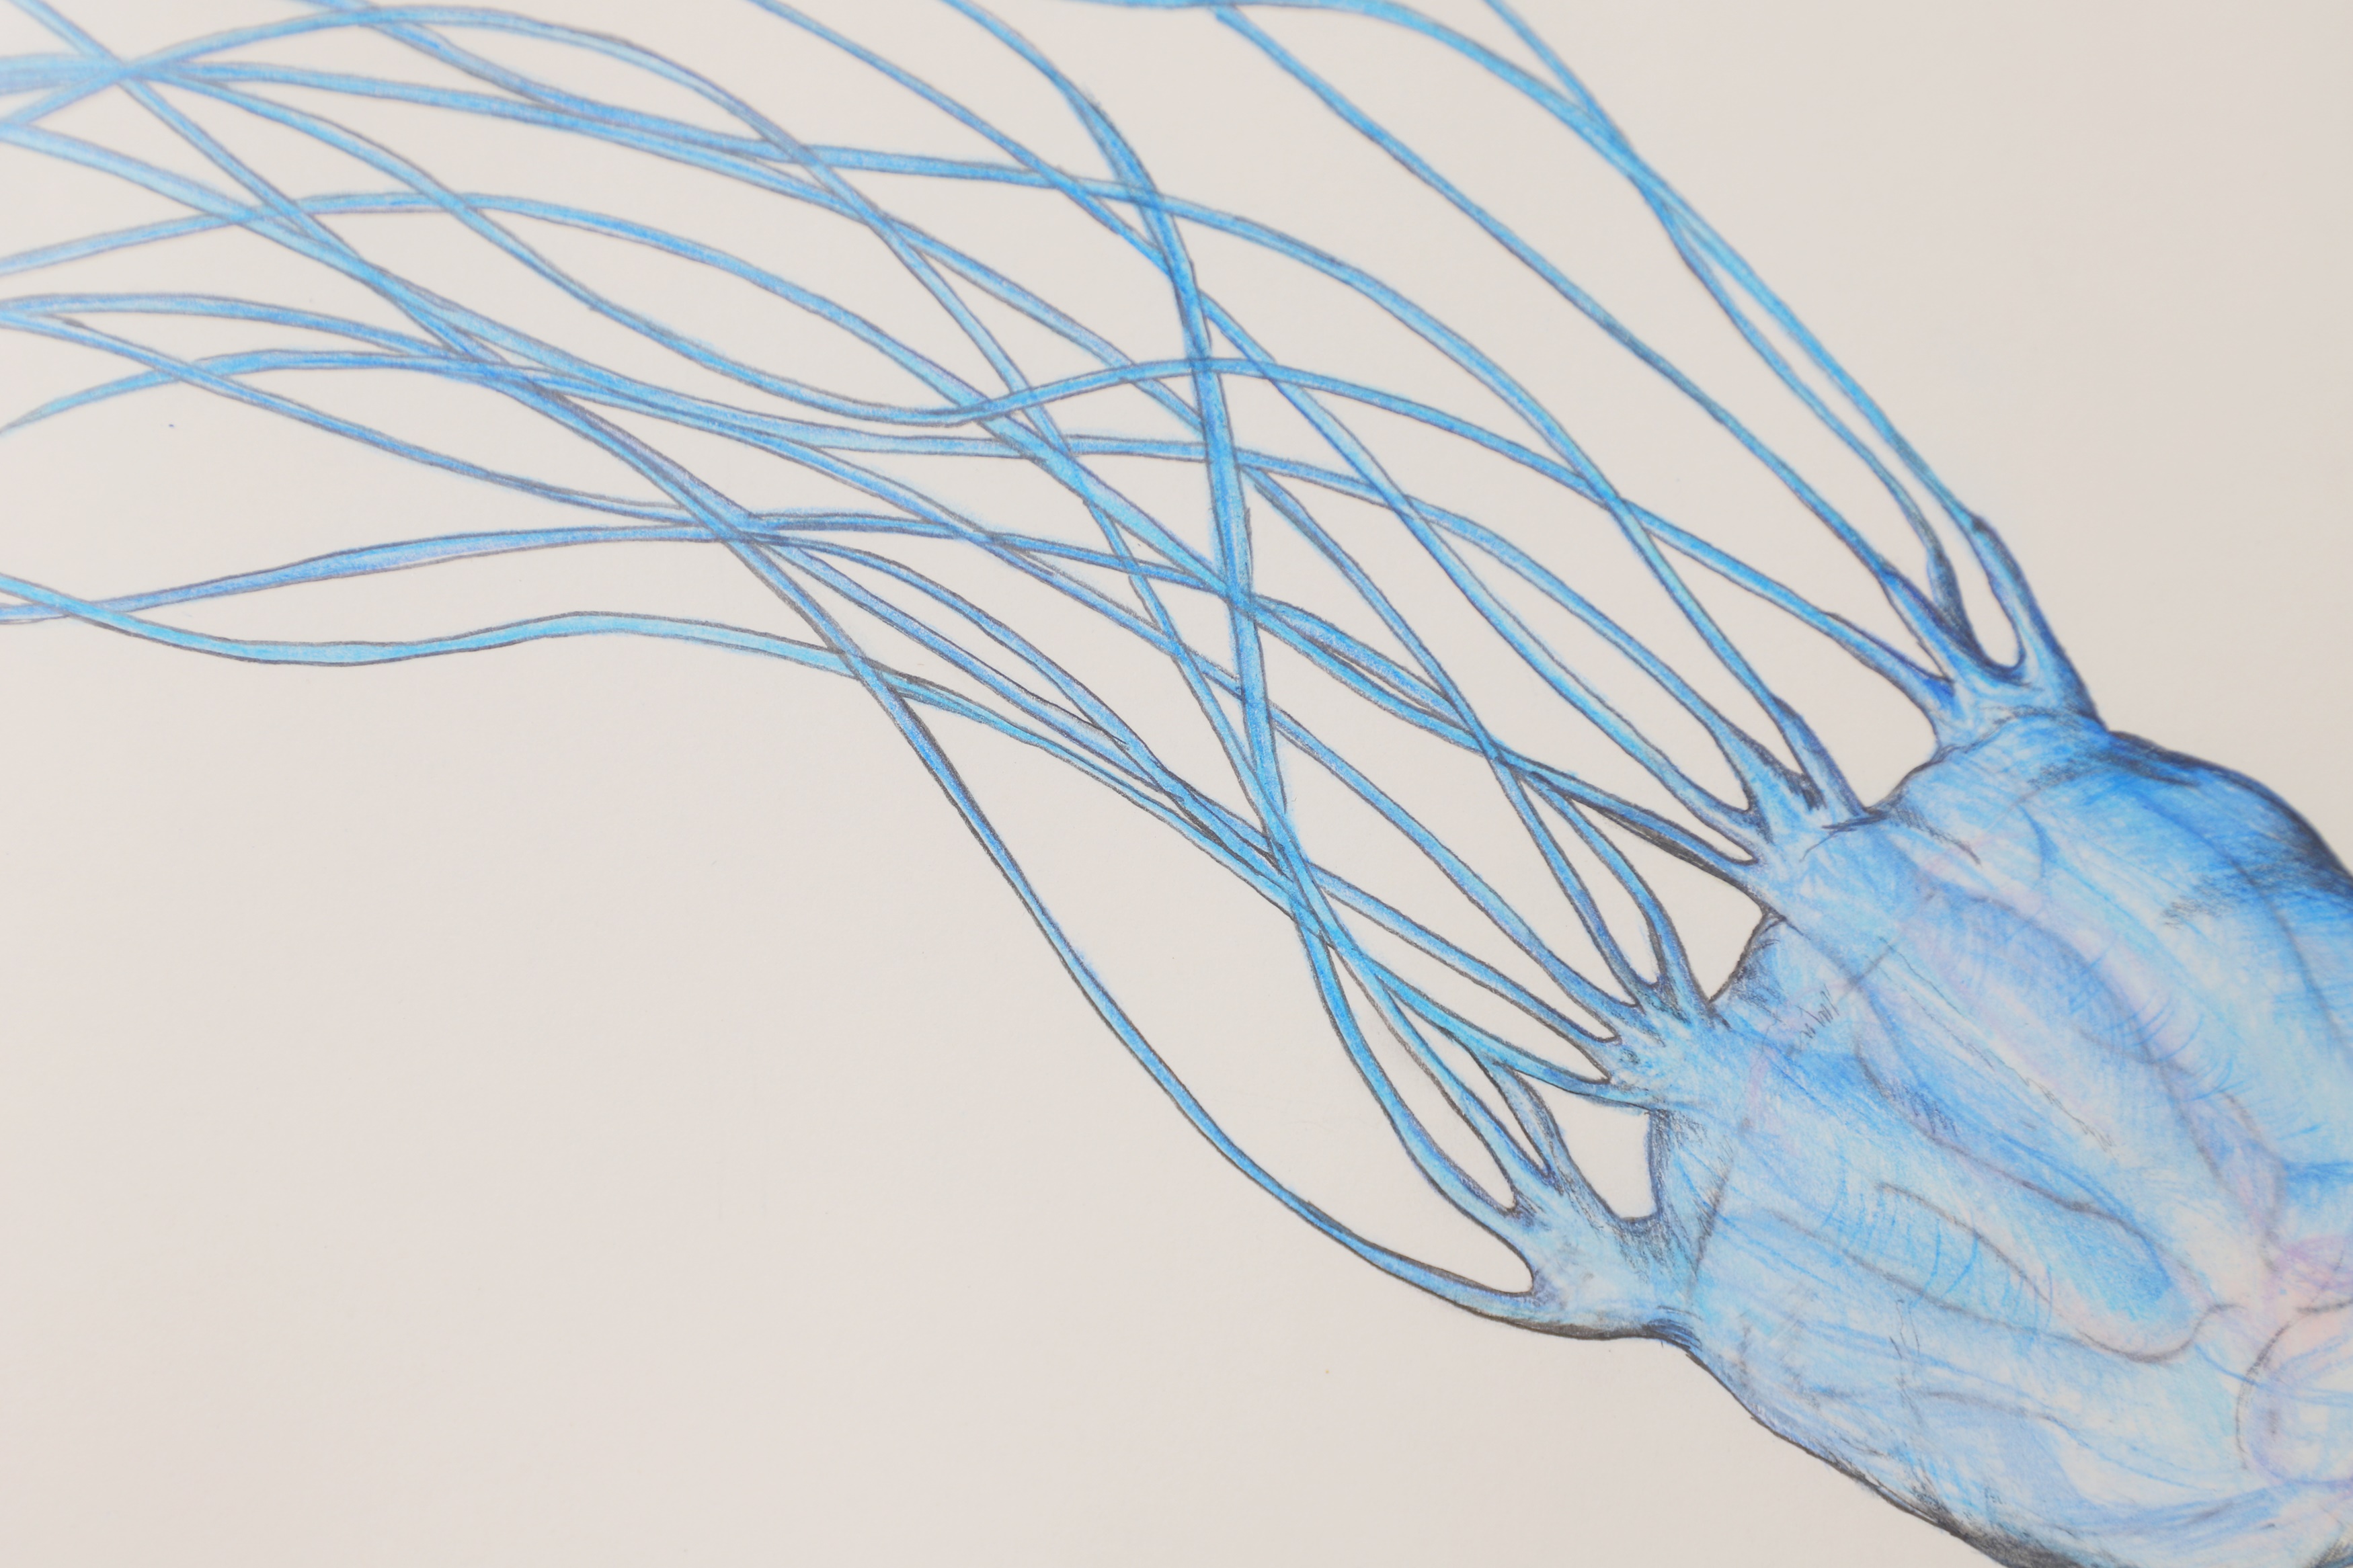 Phil Coles (contemporary) 'Death Down Under', Box Jellyfish; (£300-500)